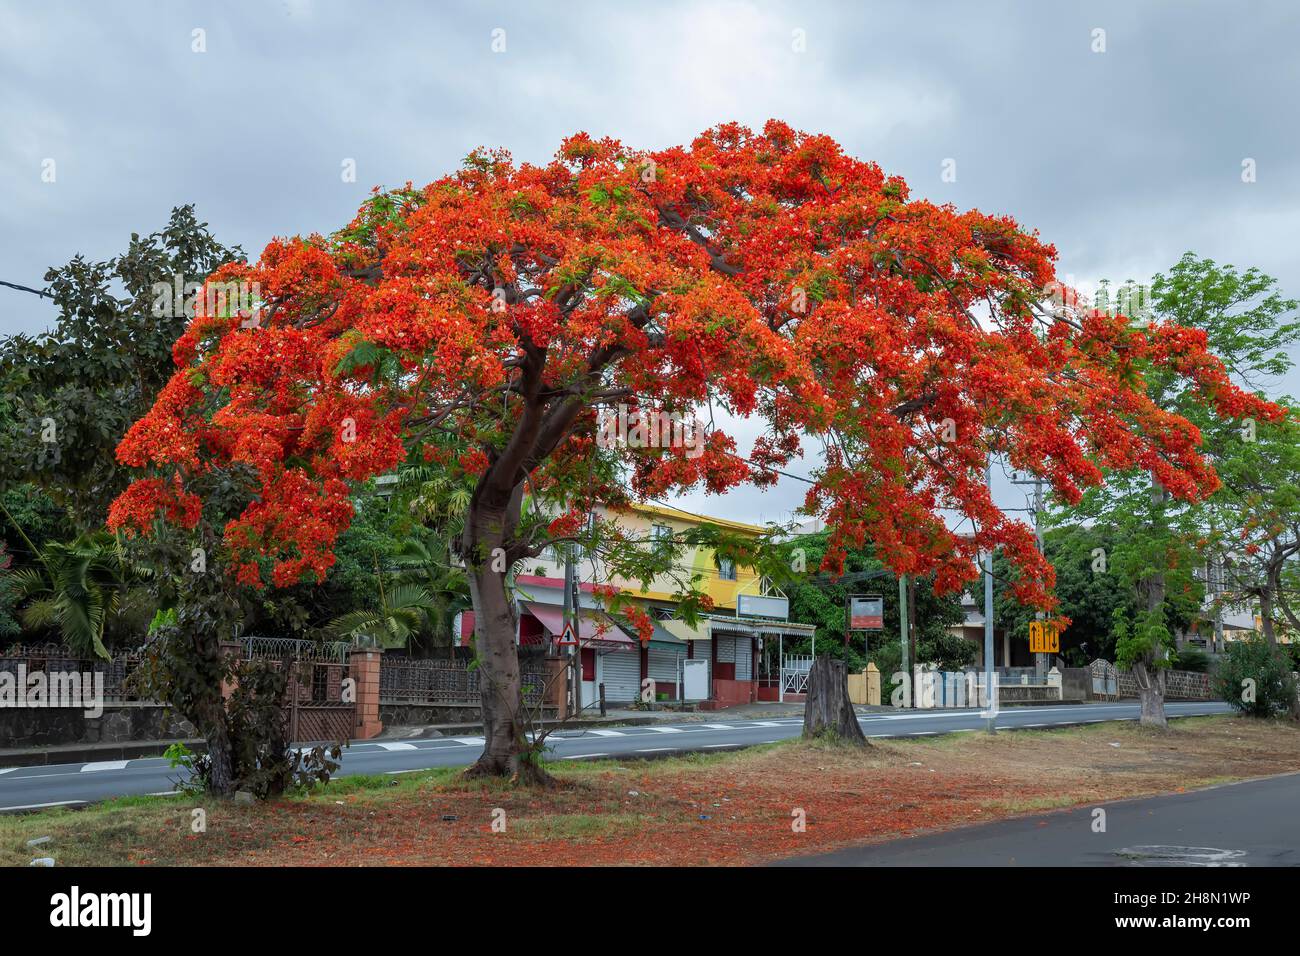 Royal poinciana (Delonix regia), also called flamboyant tree or peacock tree, strikingly beautiful flowering tree of the pea family (Fabaceae) Stock Photo